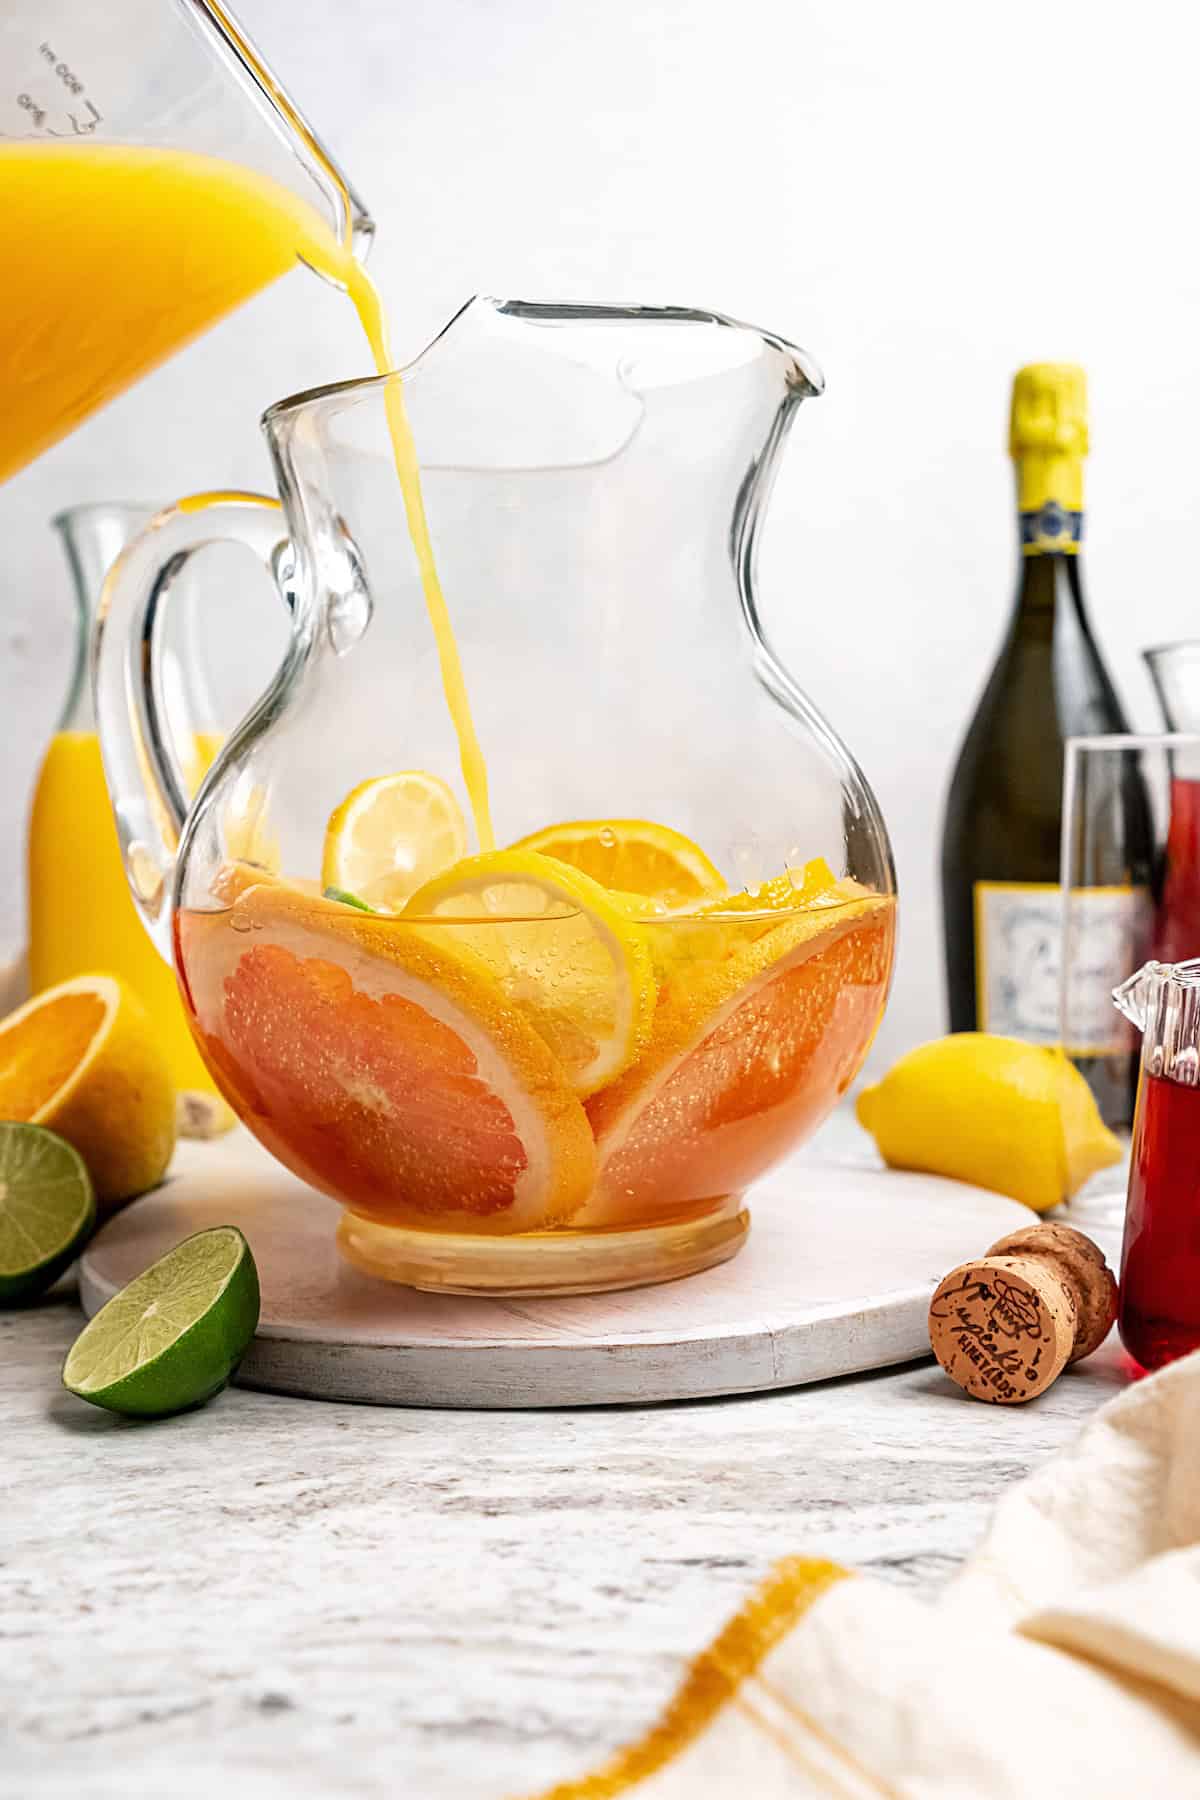 Orange juice being poured into a pitcher containing citrus slices and prosecco.